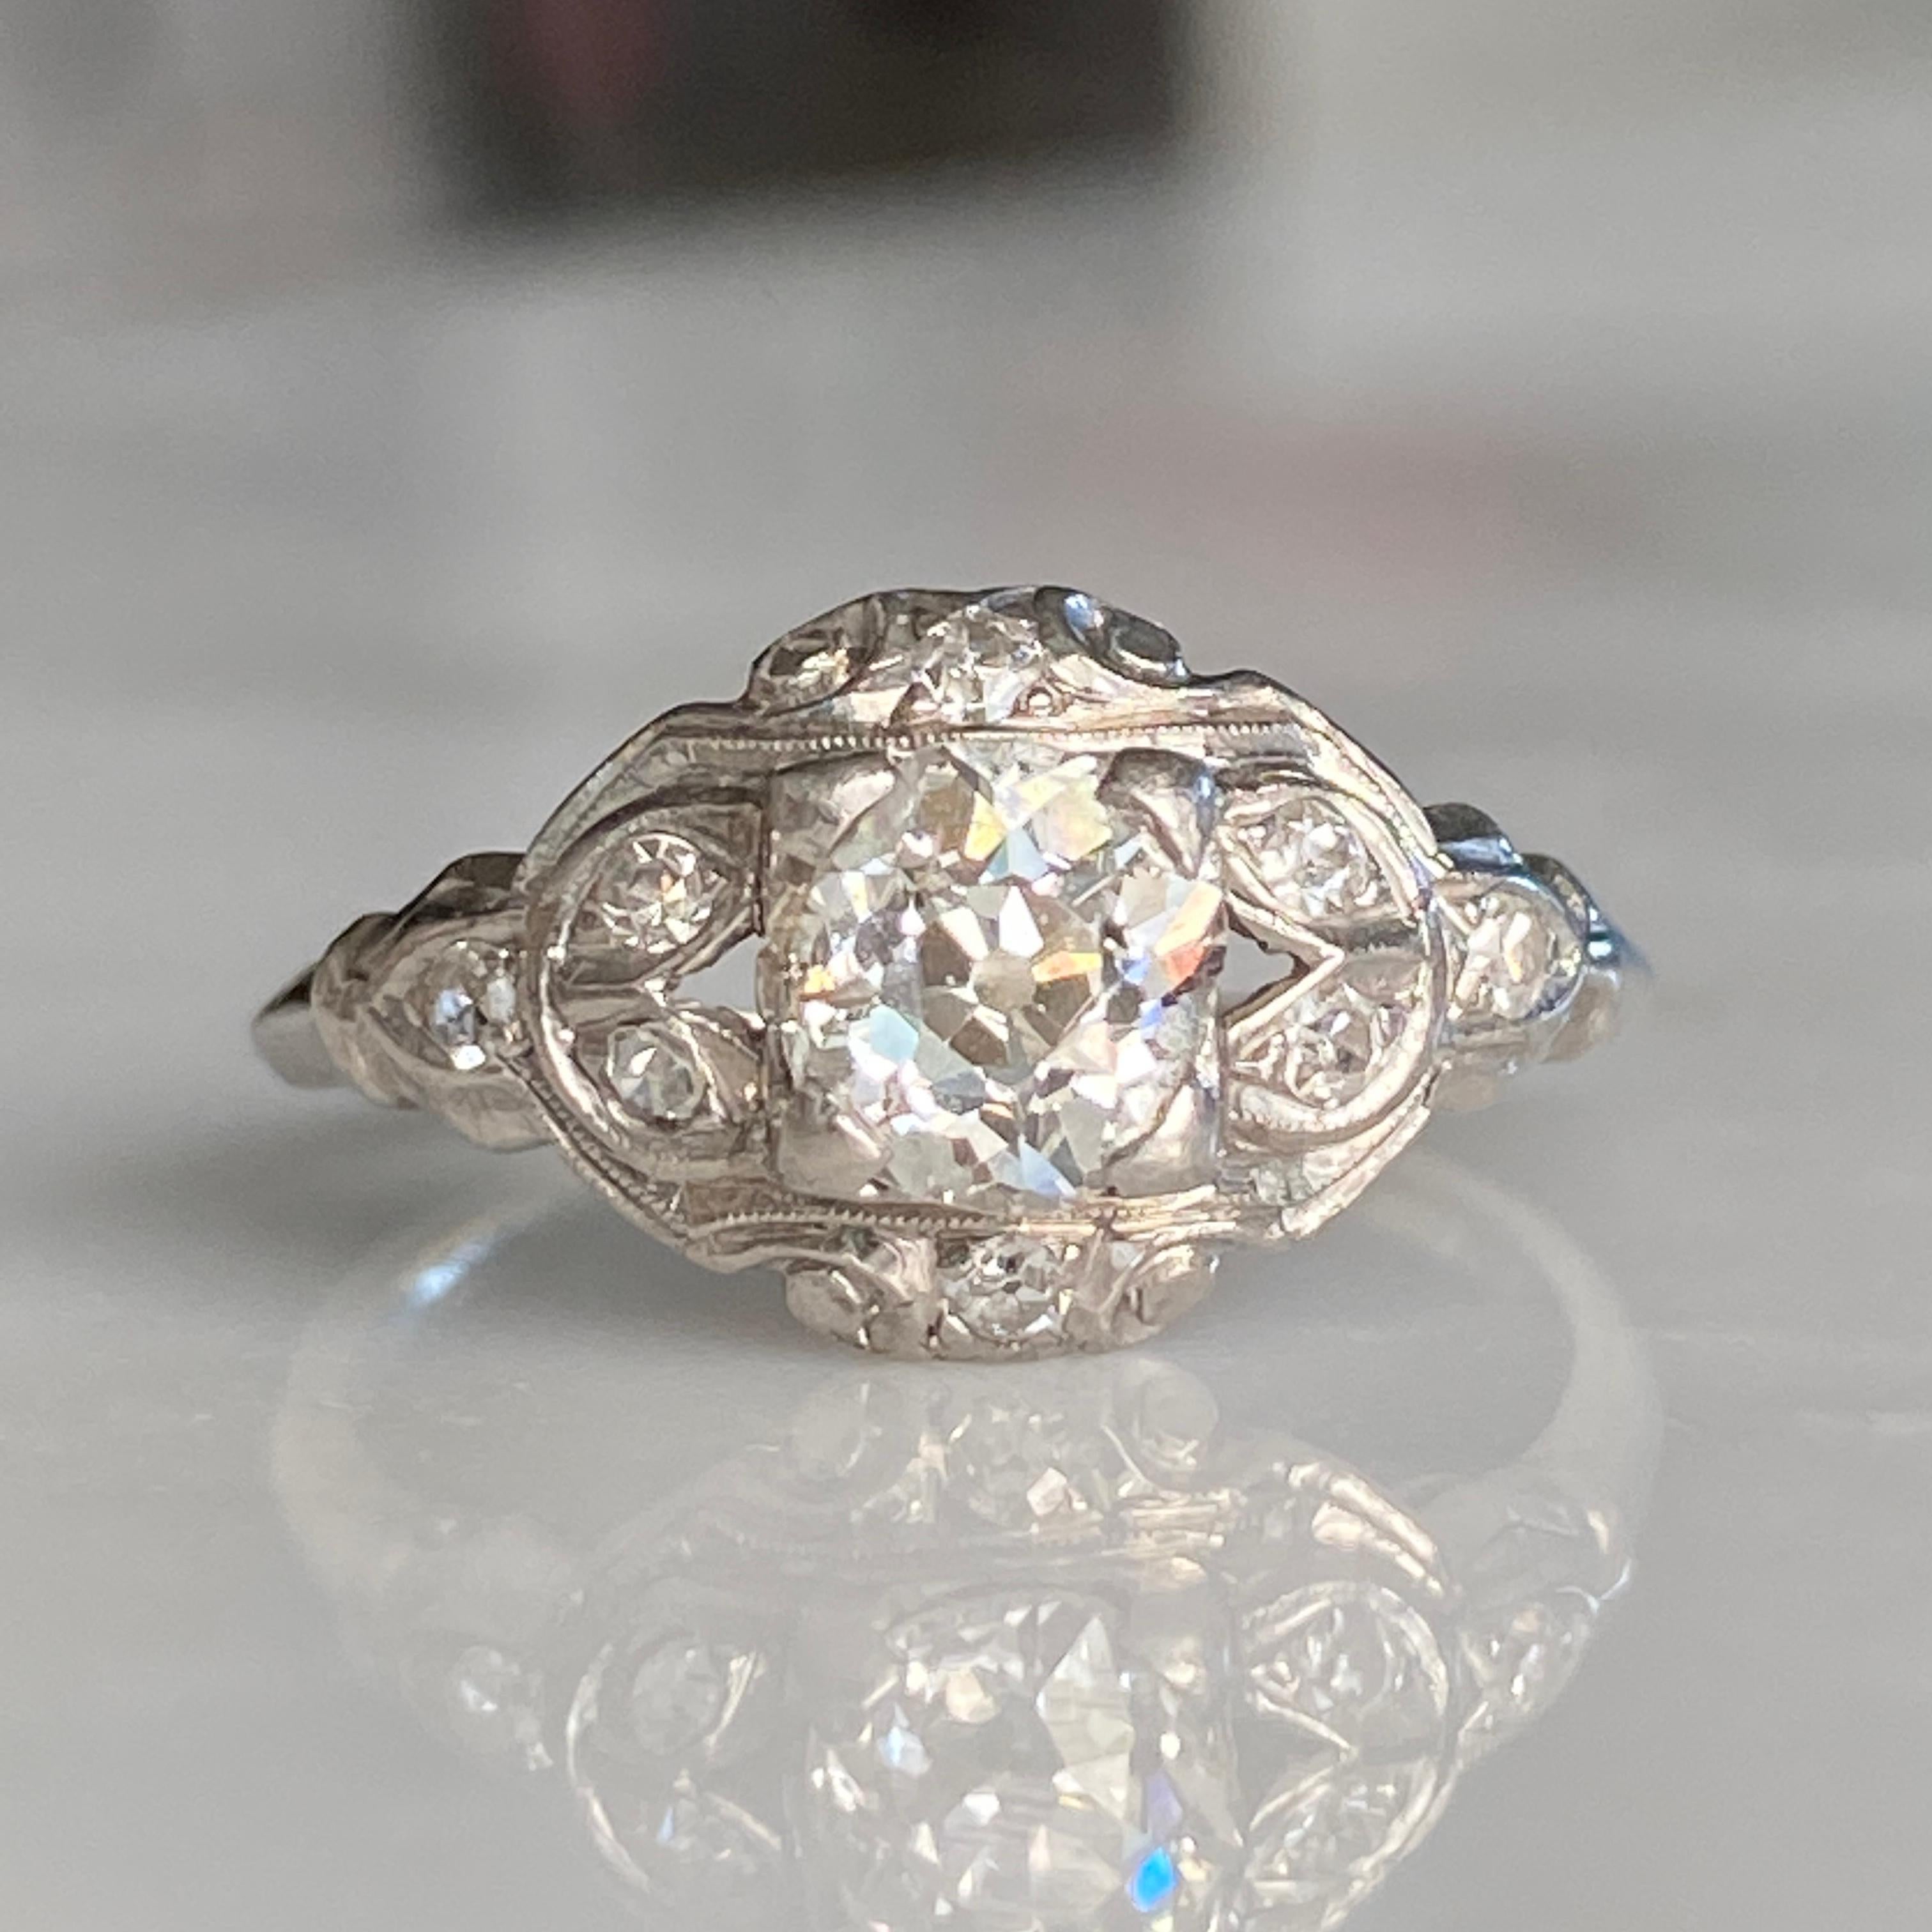 Details:
Sweet Art Deco Platinum .81ct Mine Cut Diamond engagement ring. This would make a lovely engagement ring! This ring comes with an appraisal. You will not be disappointed! Please ask all necessary questions prior to placing an